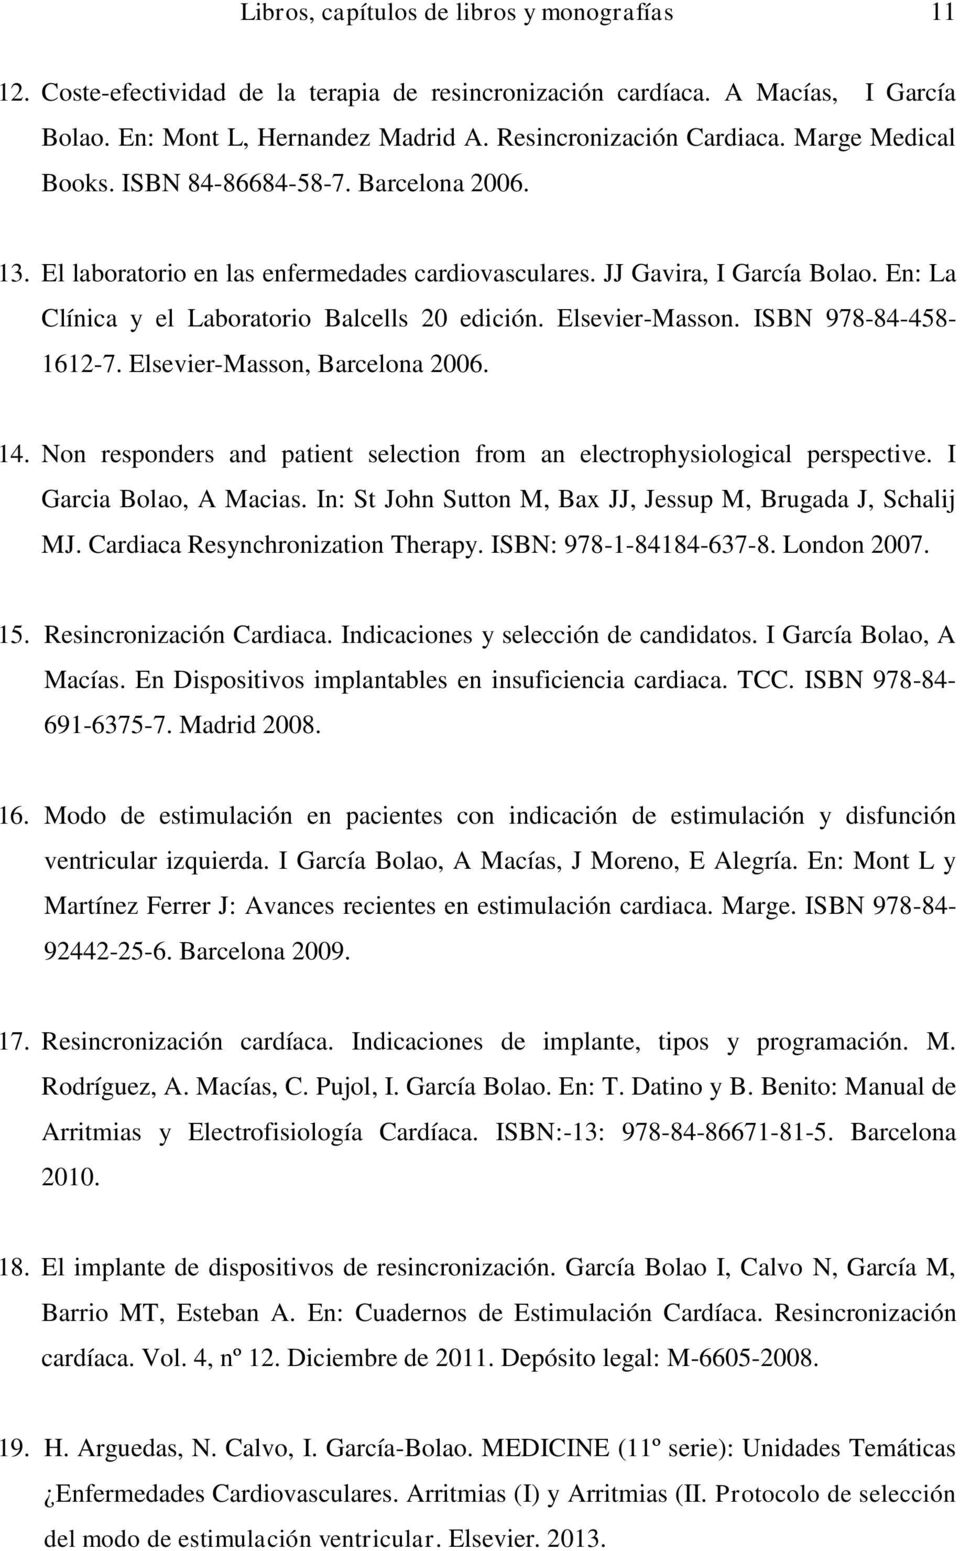 Elsevier-Masson. ISBN 978-84-458-1612-7. Elsevier-Masson, Barcelona 2006. 14. Non responders and patient selection from an electrophysiological perspective. I Garcia Bolao, A Macias.